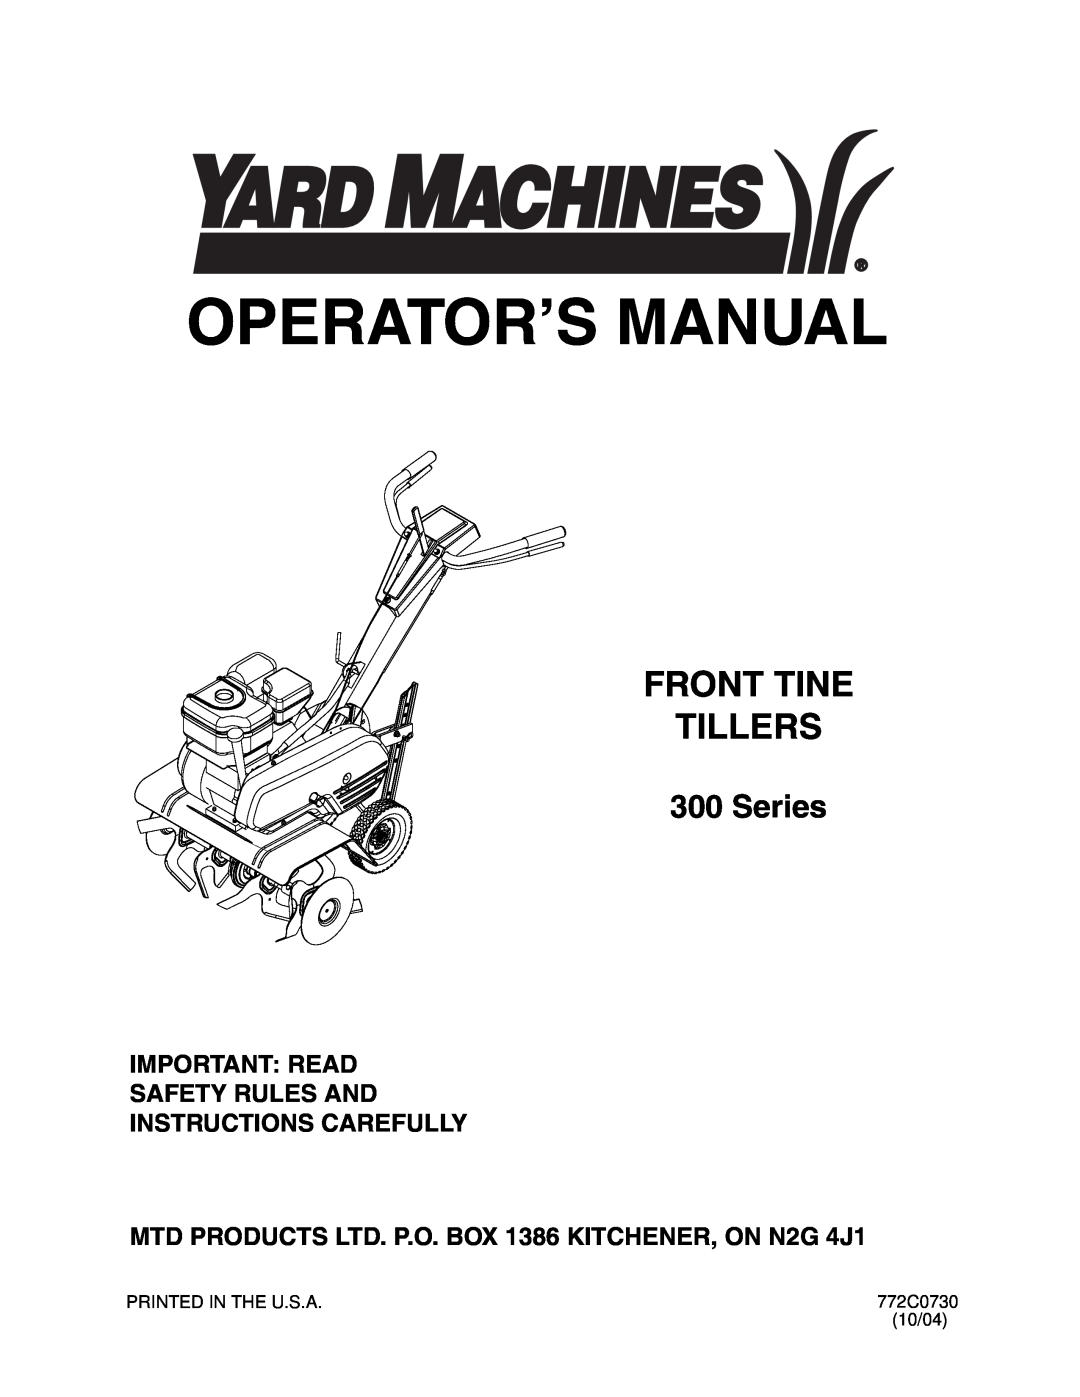 Yard Machines 300 manual Operator’S Manual, Important Read Safety Rules And Instructions Carefully, Front Tine Tillers 